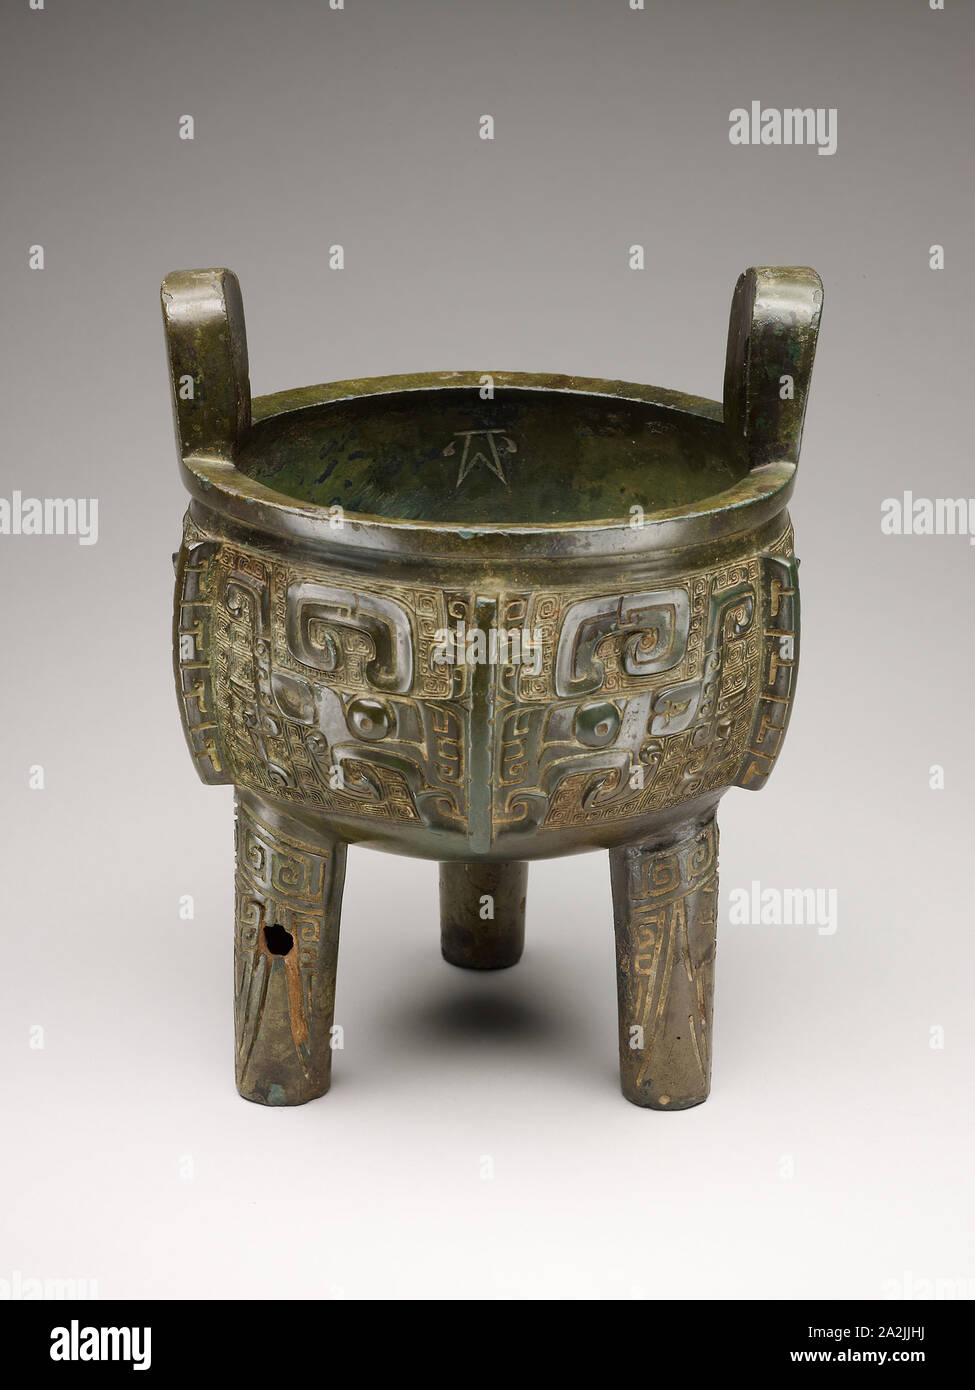 Tripod Cauldron oF Ran (Ran ding), Late Shang dynasty, 13th–11th century B.C., China, Bronze, Overall: H. 24.4 × diam. 18.9 cm (9 5/8 × 7 7/16 in.), H. 19.1 × diam. 18.9 cm (without handles) (7 1/2 × 7 7/16 in Stock Photo